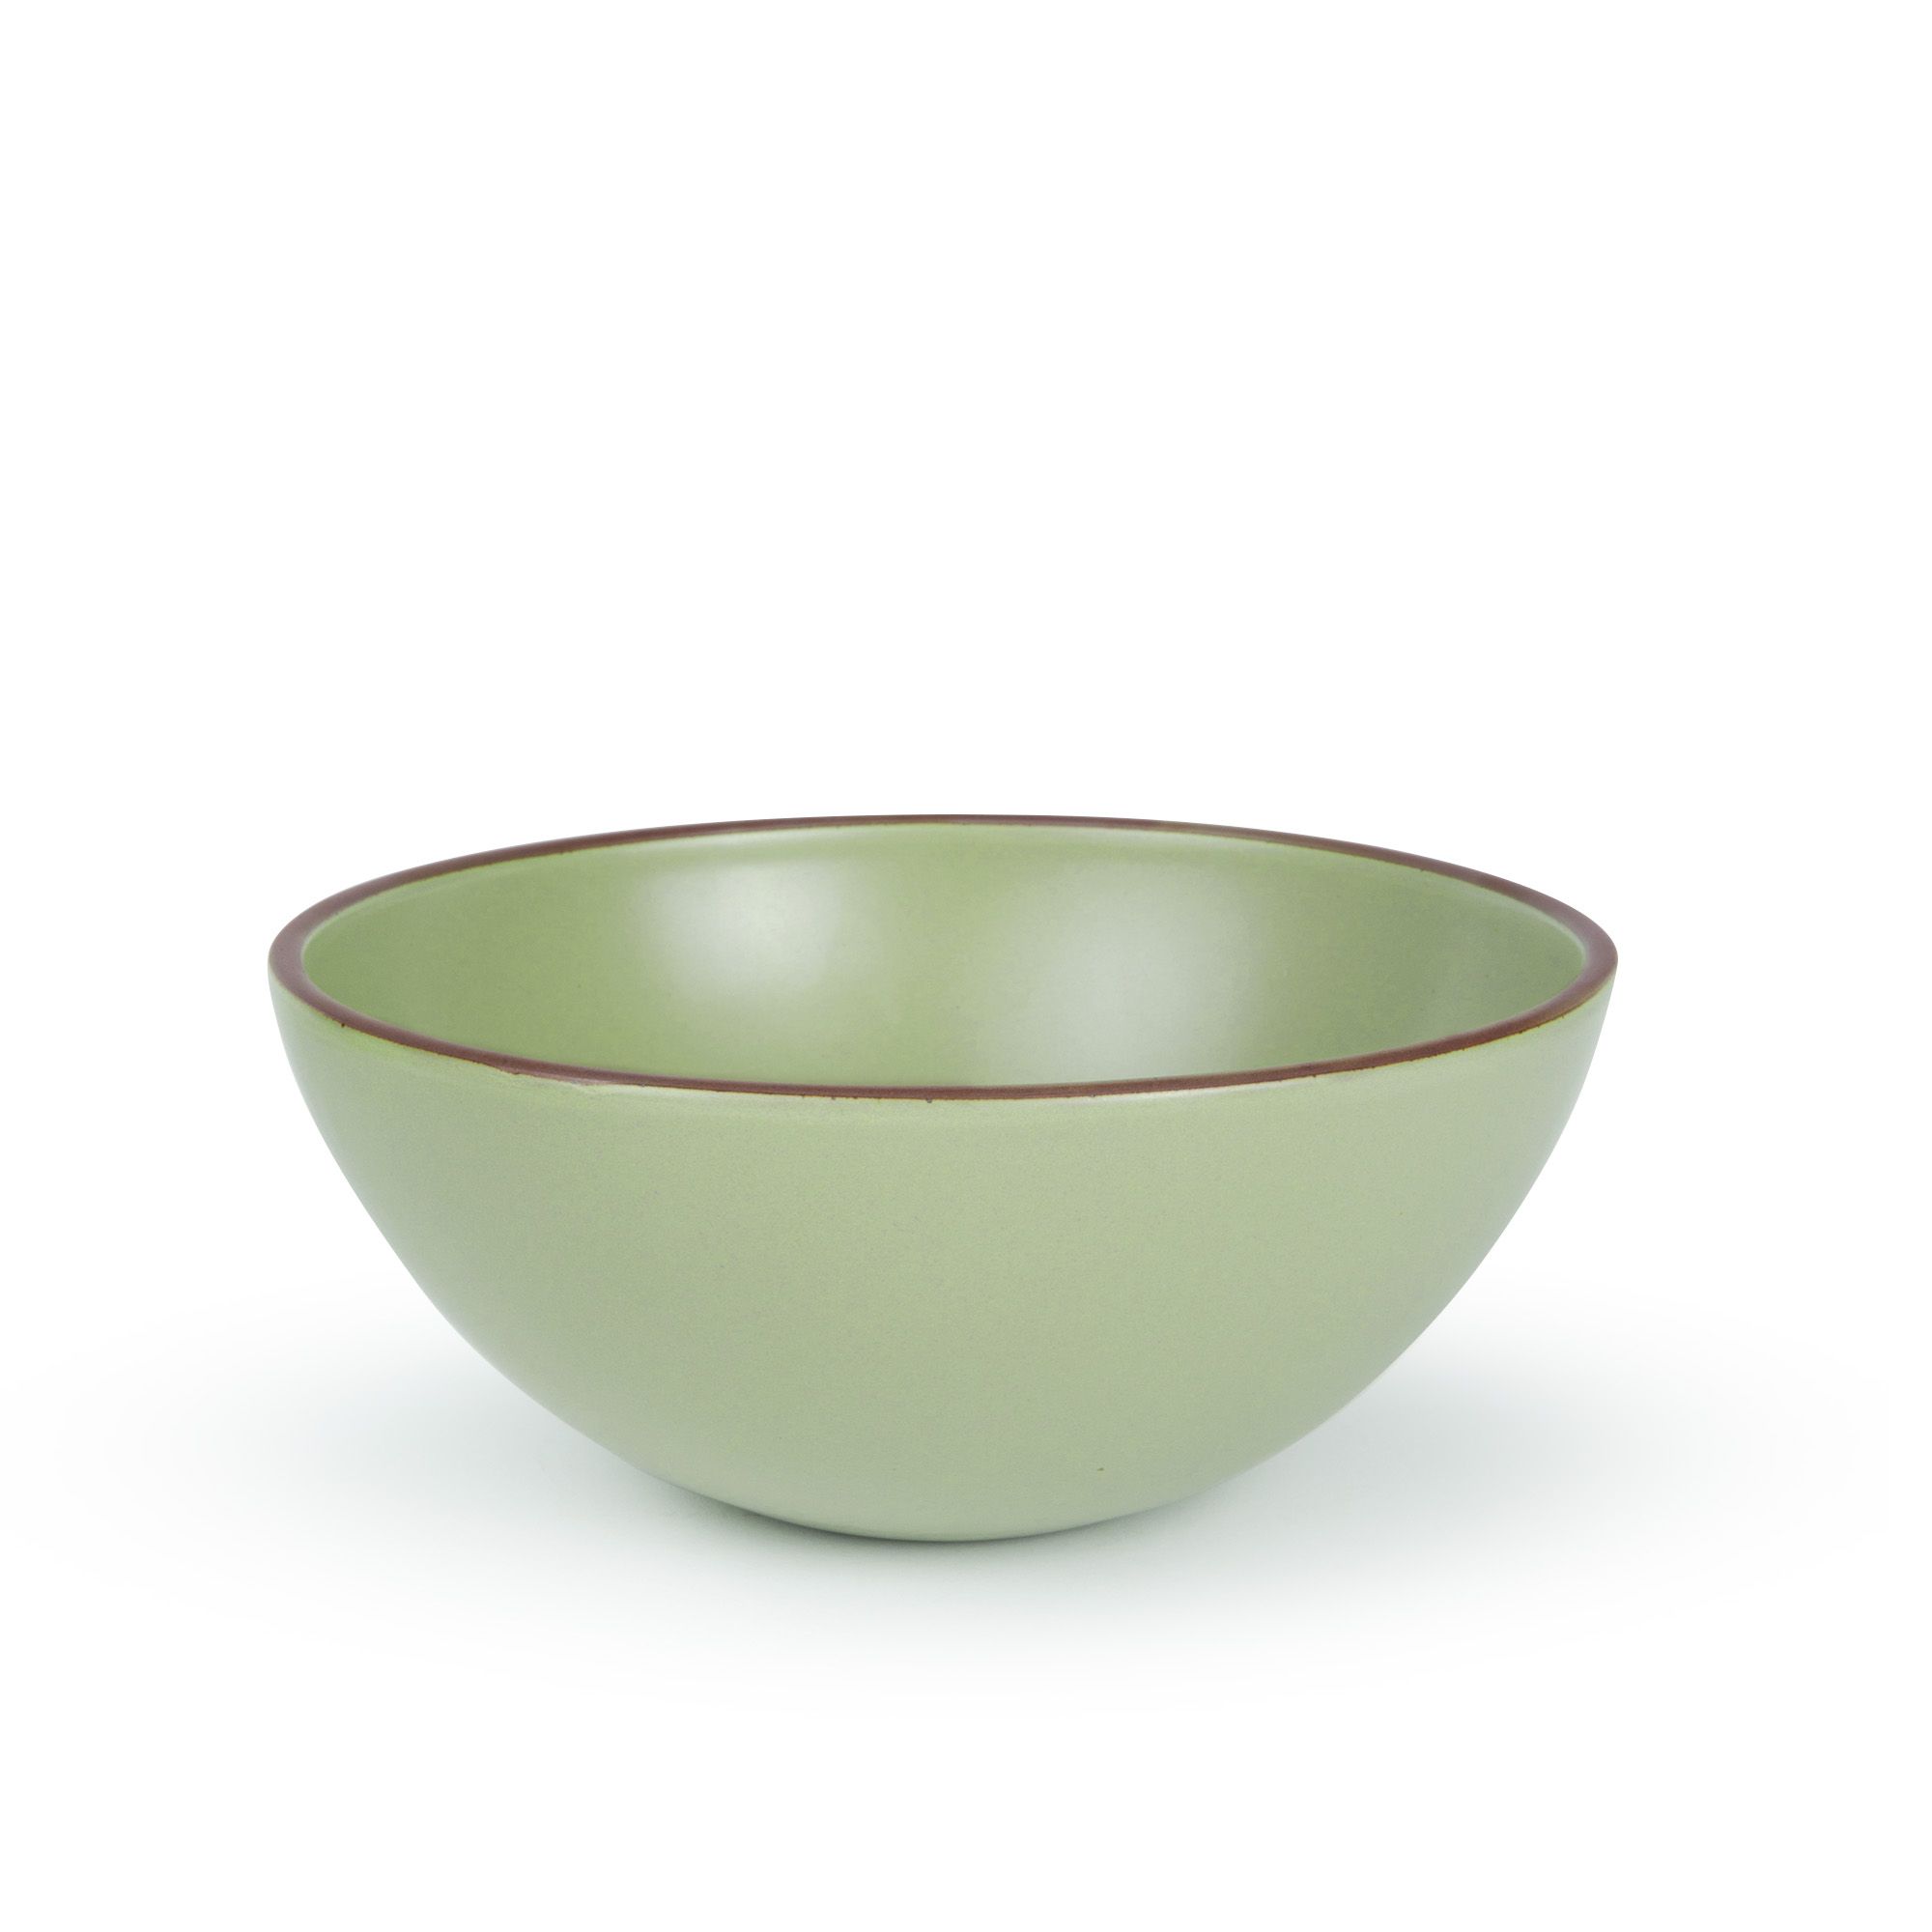 A large rounded ceramic bowl in a calming sage green color featuring iron speckles and an unglazed rim